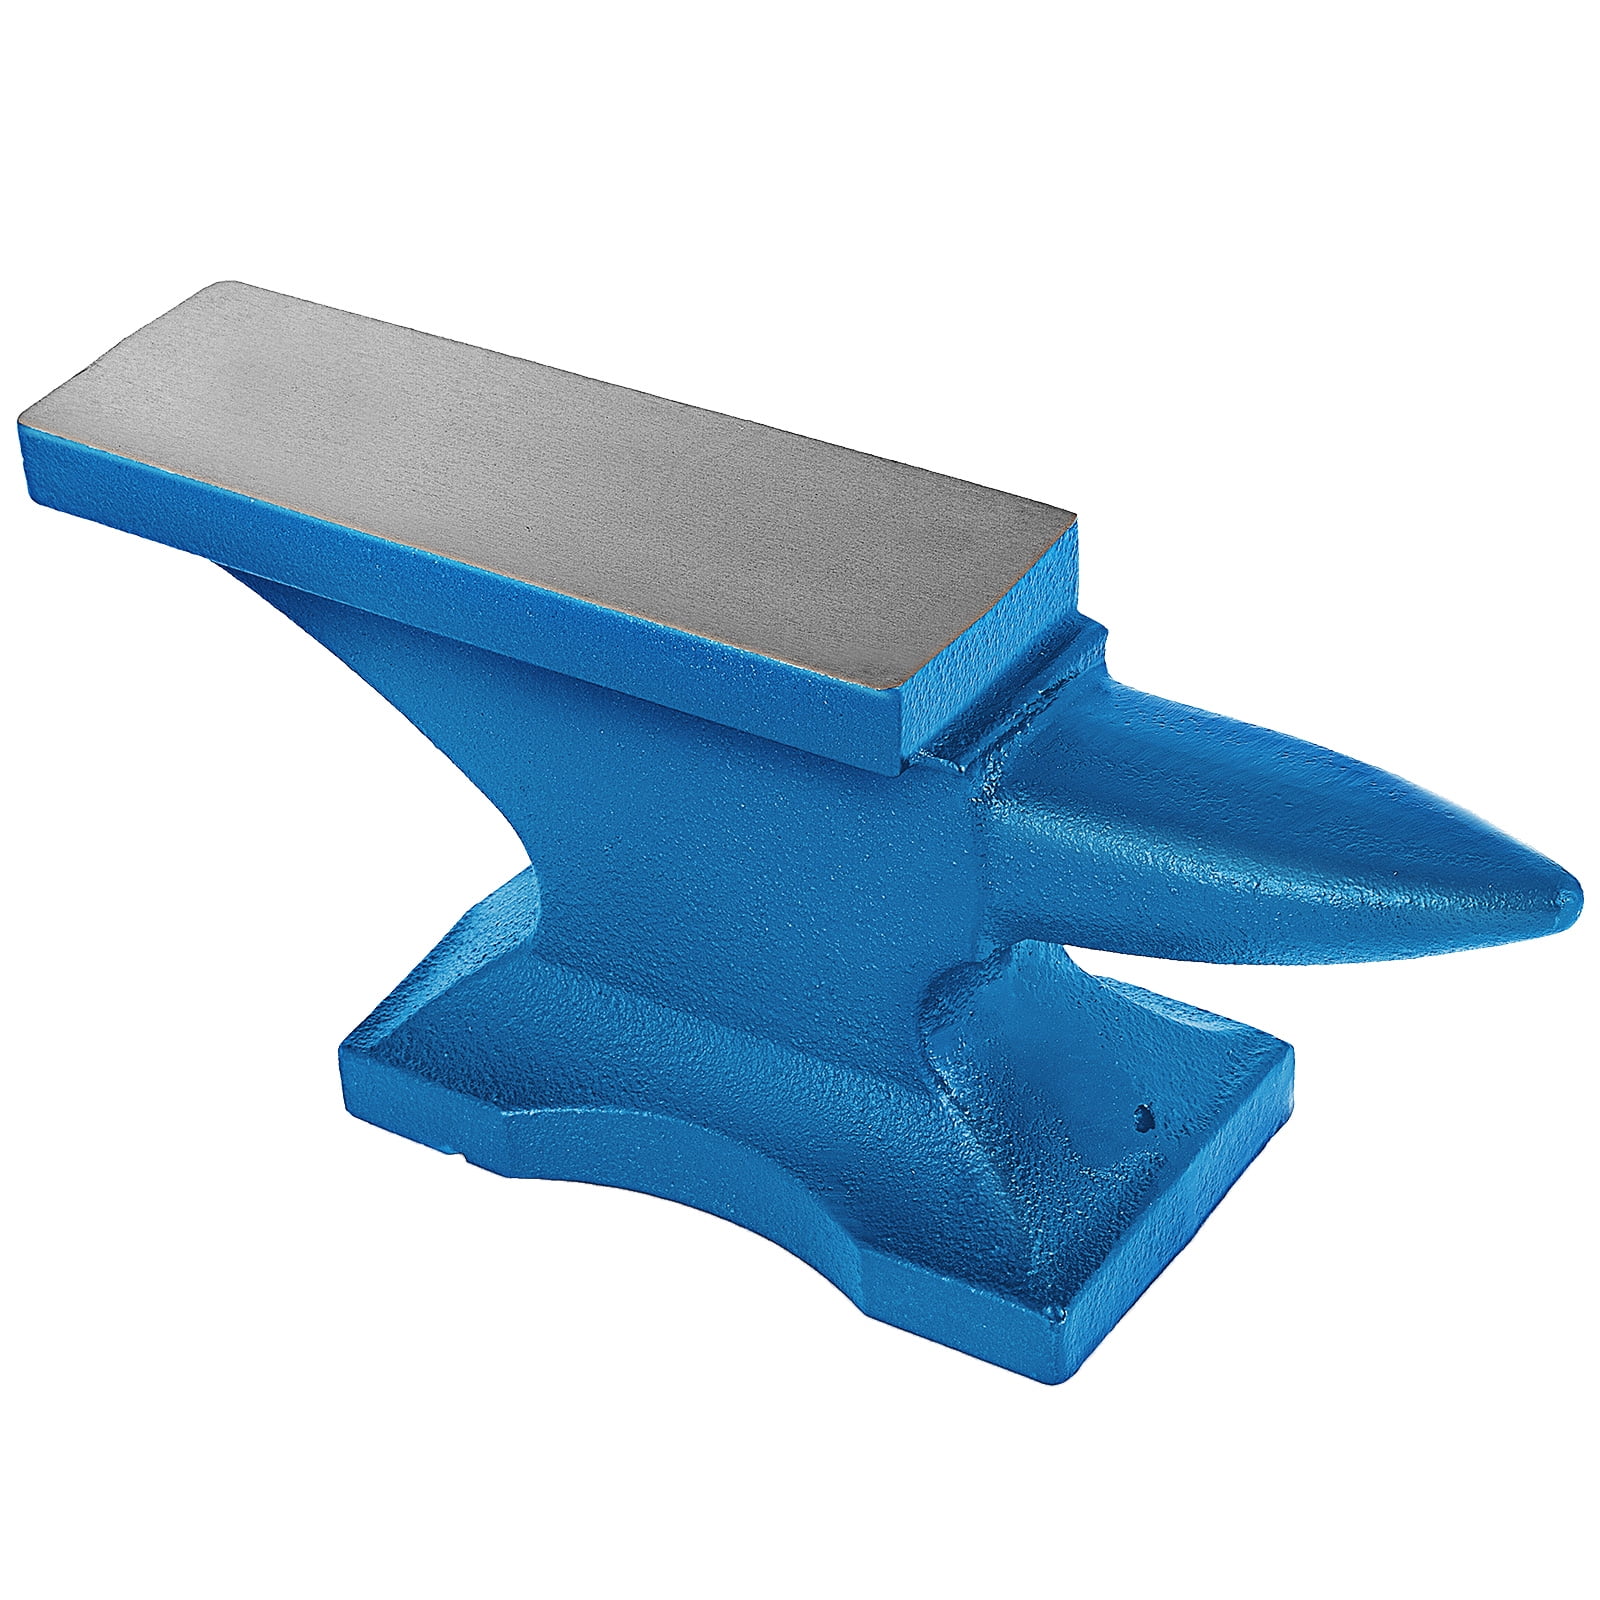 Tsurpcao tsurpcao iron anvil,iron horn anvil bench block for jewelry making  forge tools equipment (1.2 lb, blue)